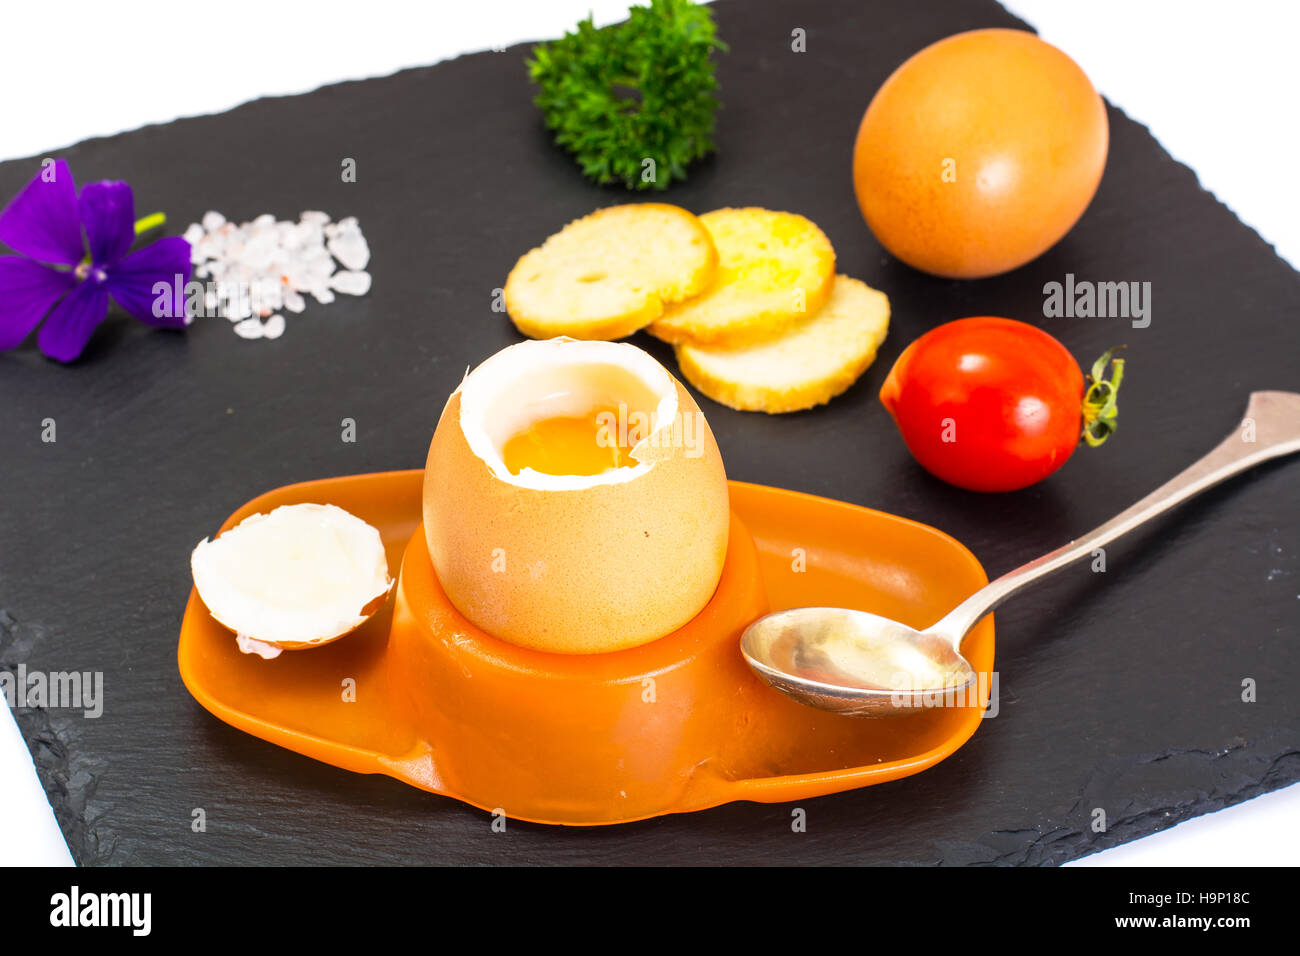 Egg Cooked Soft Boiled on Black Stone Plate Studio Photo Stock Photo